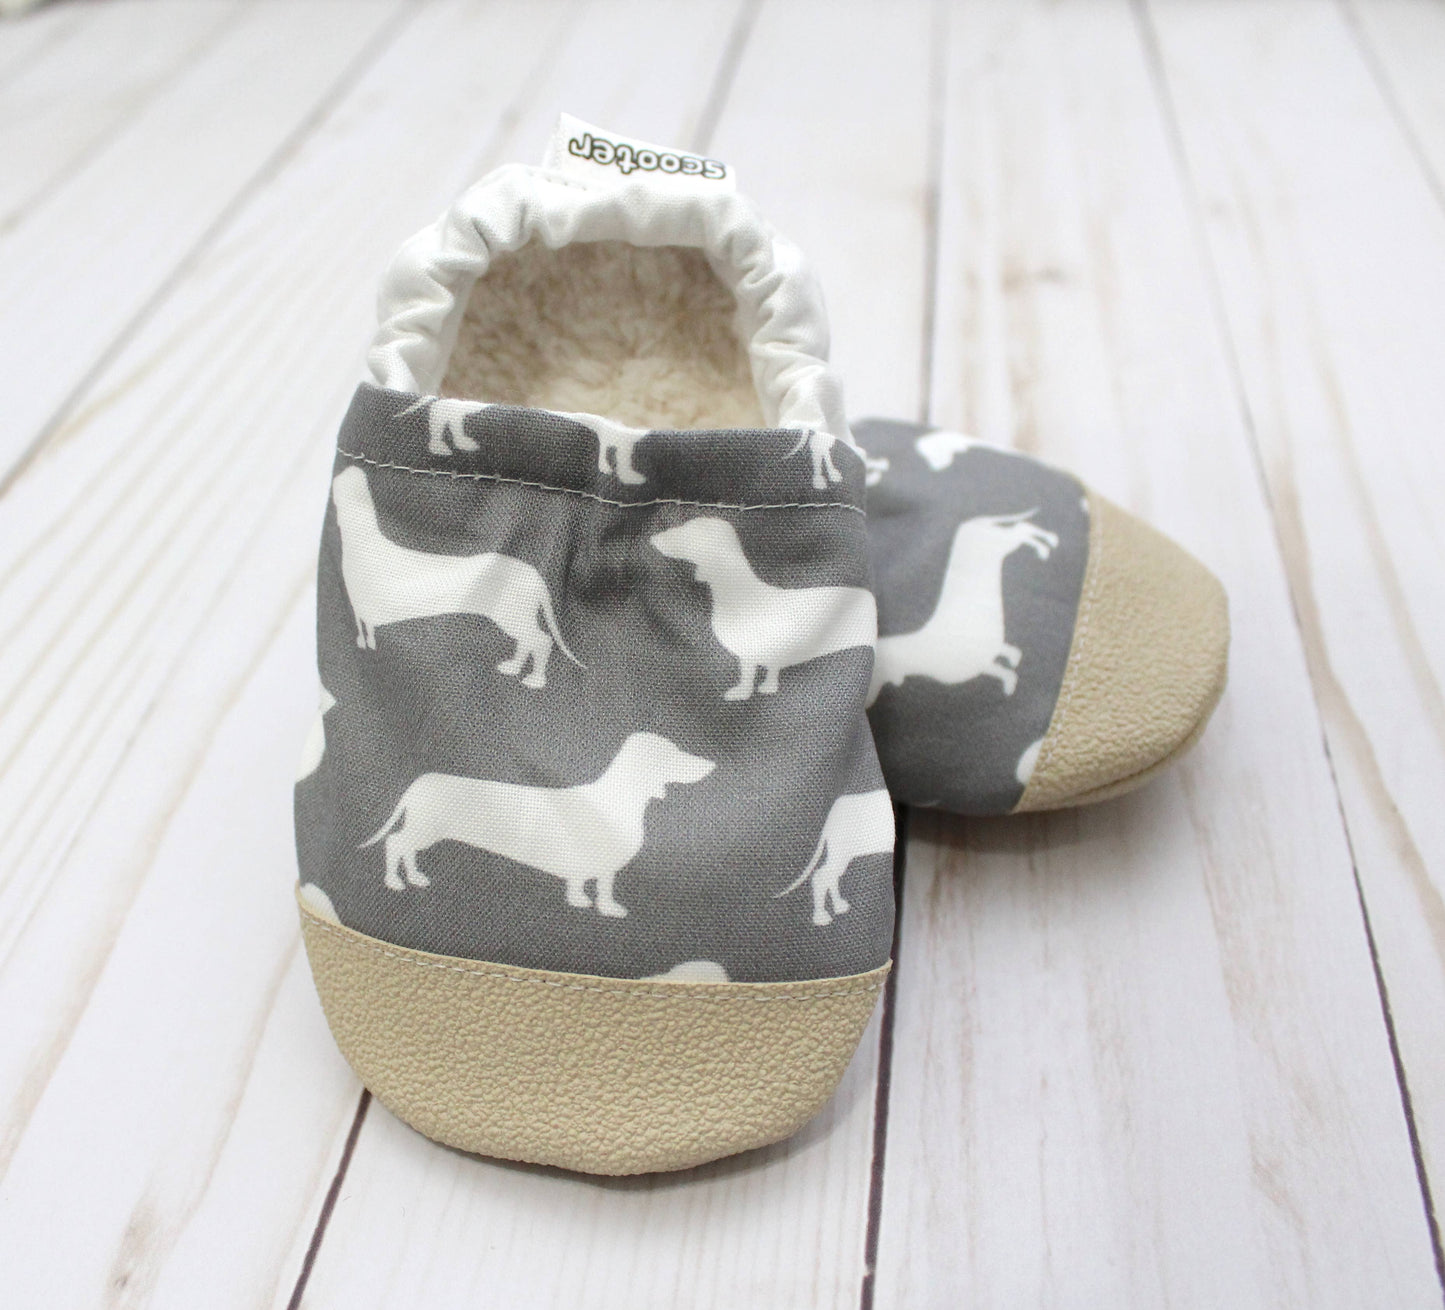 Scooter Booties - Weiner Dogs Baby Shoes: 2 Toddler